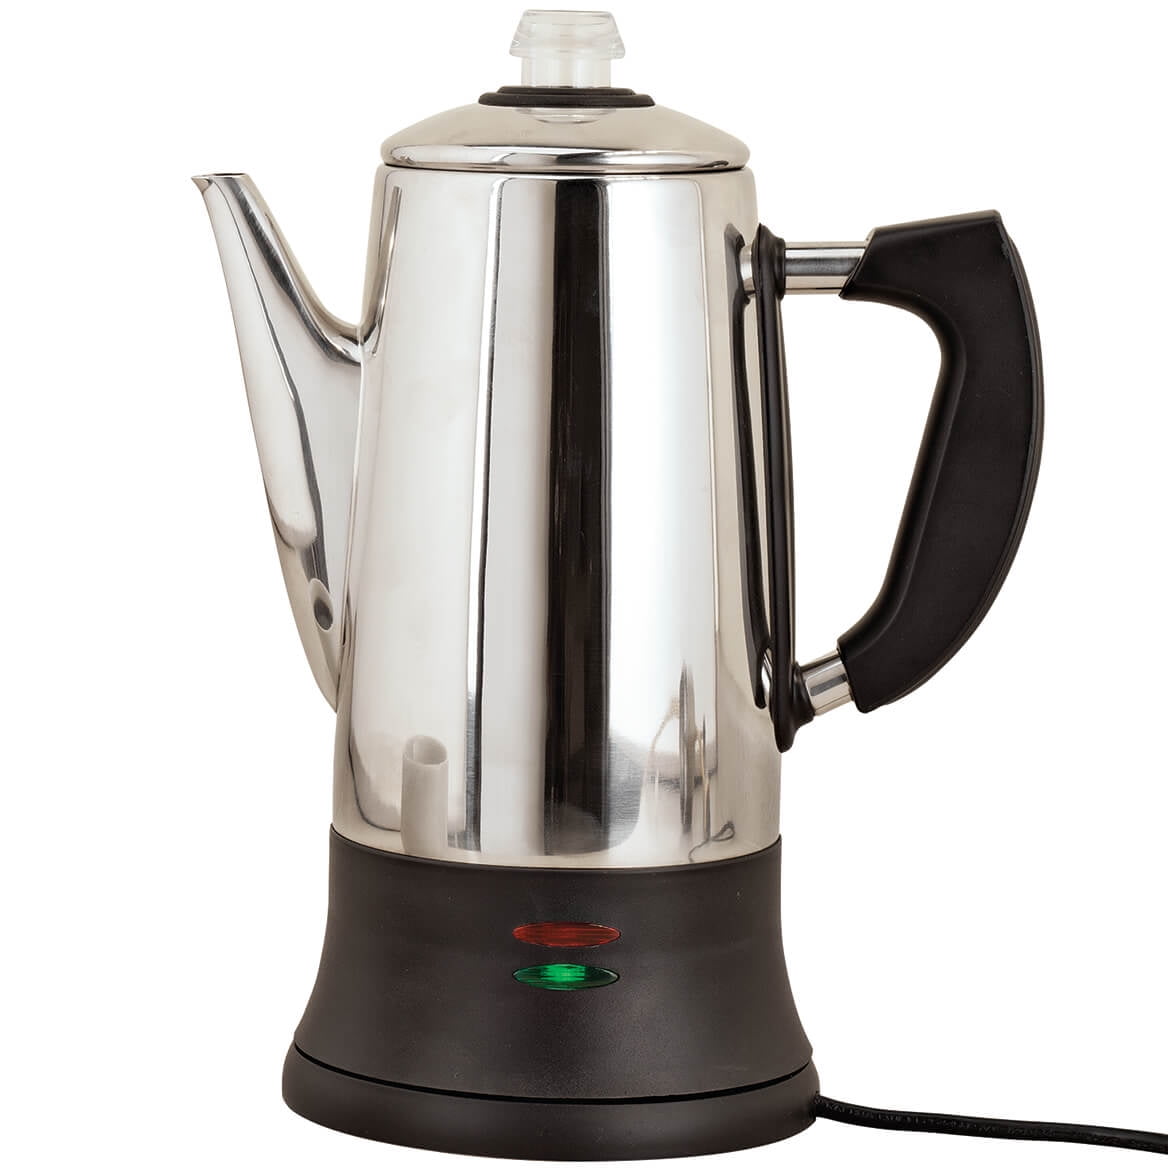 Stainless Steel Percolator Coffee Pot 28 Cups - Stansport